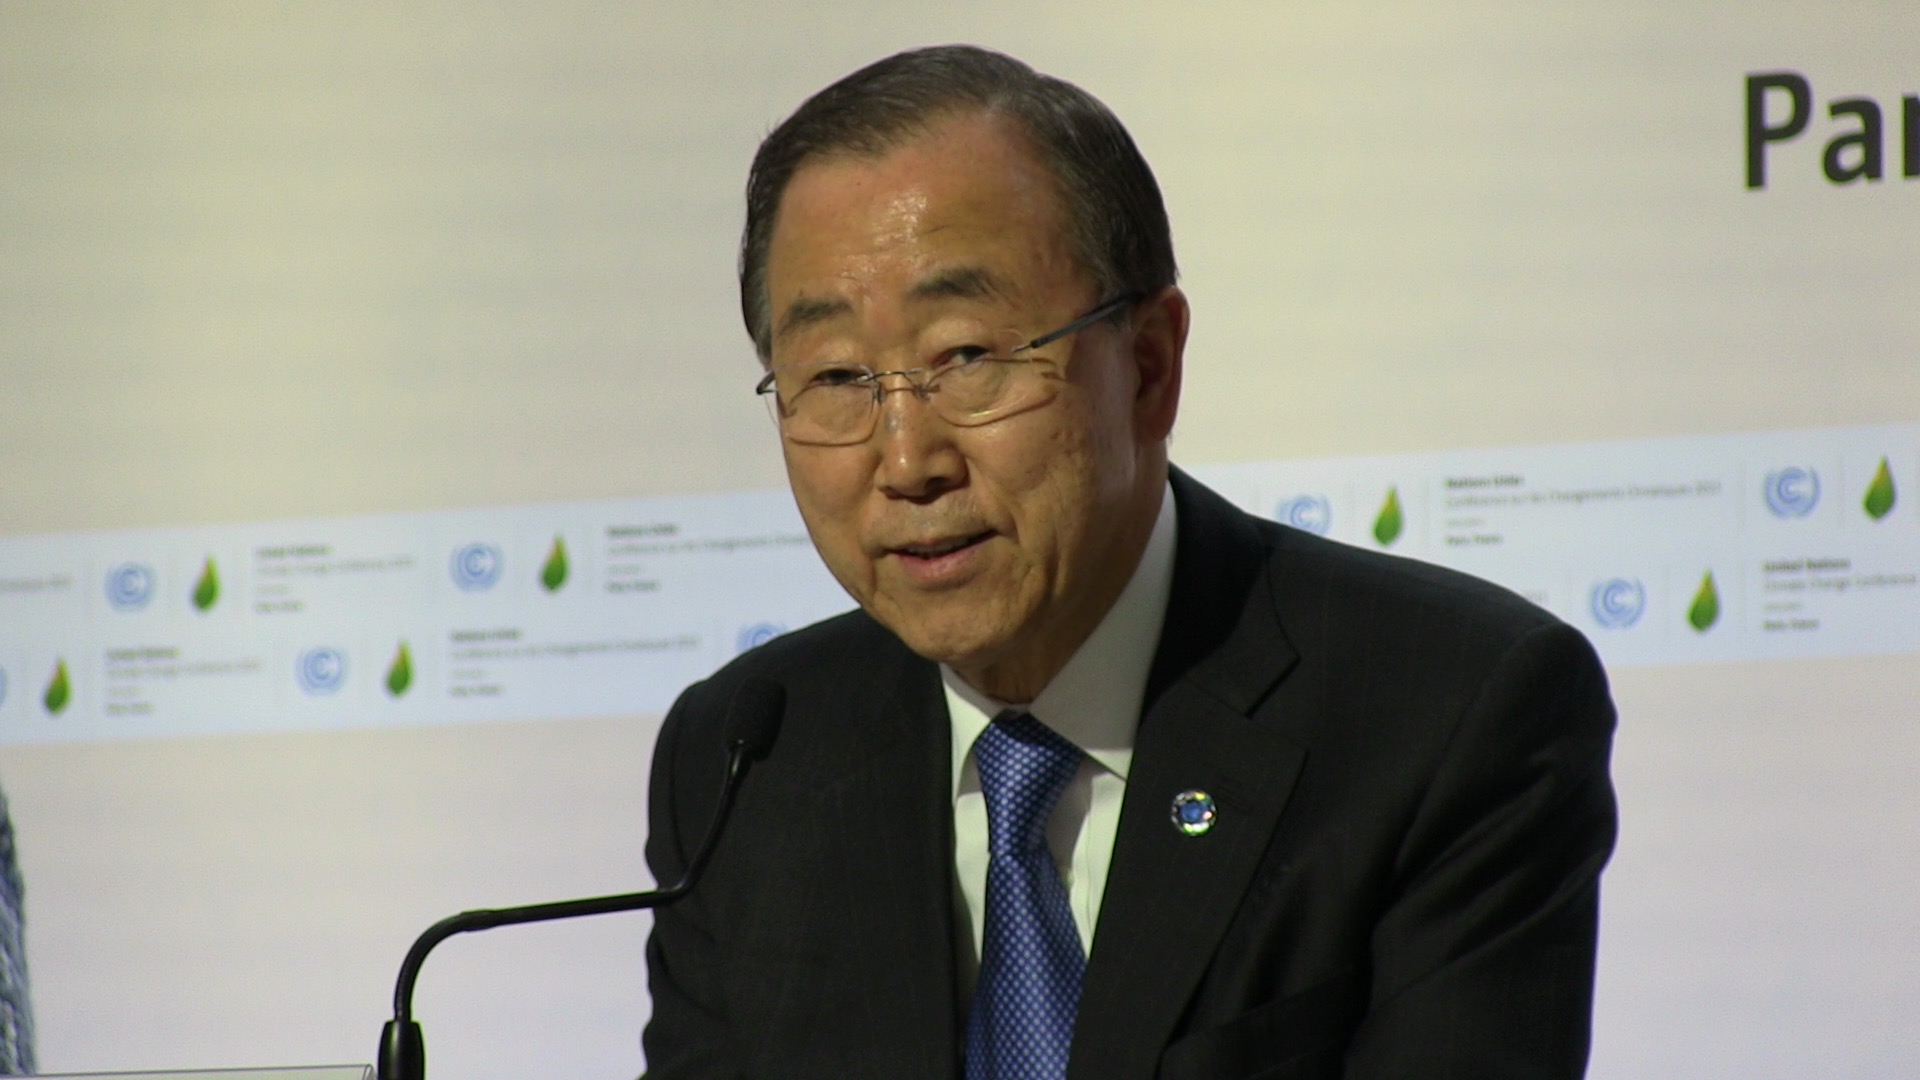 United Nations Secretary General Ban ki-Moon during a press conference in La Bourget, Paris, France.